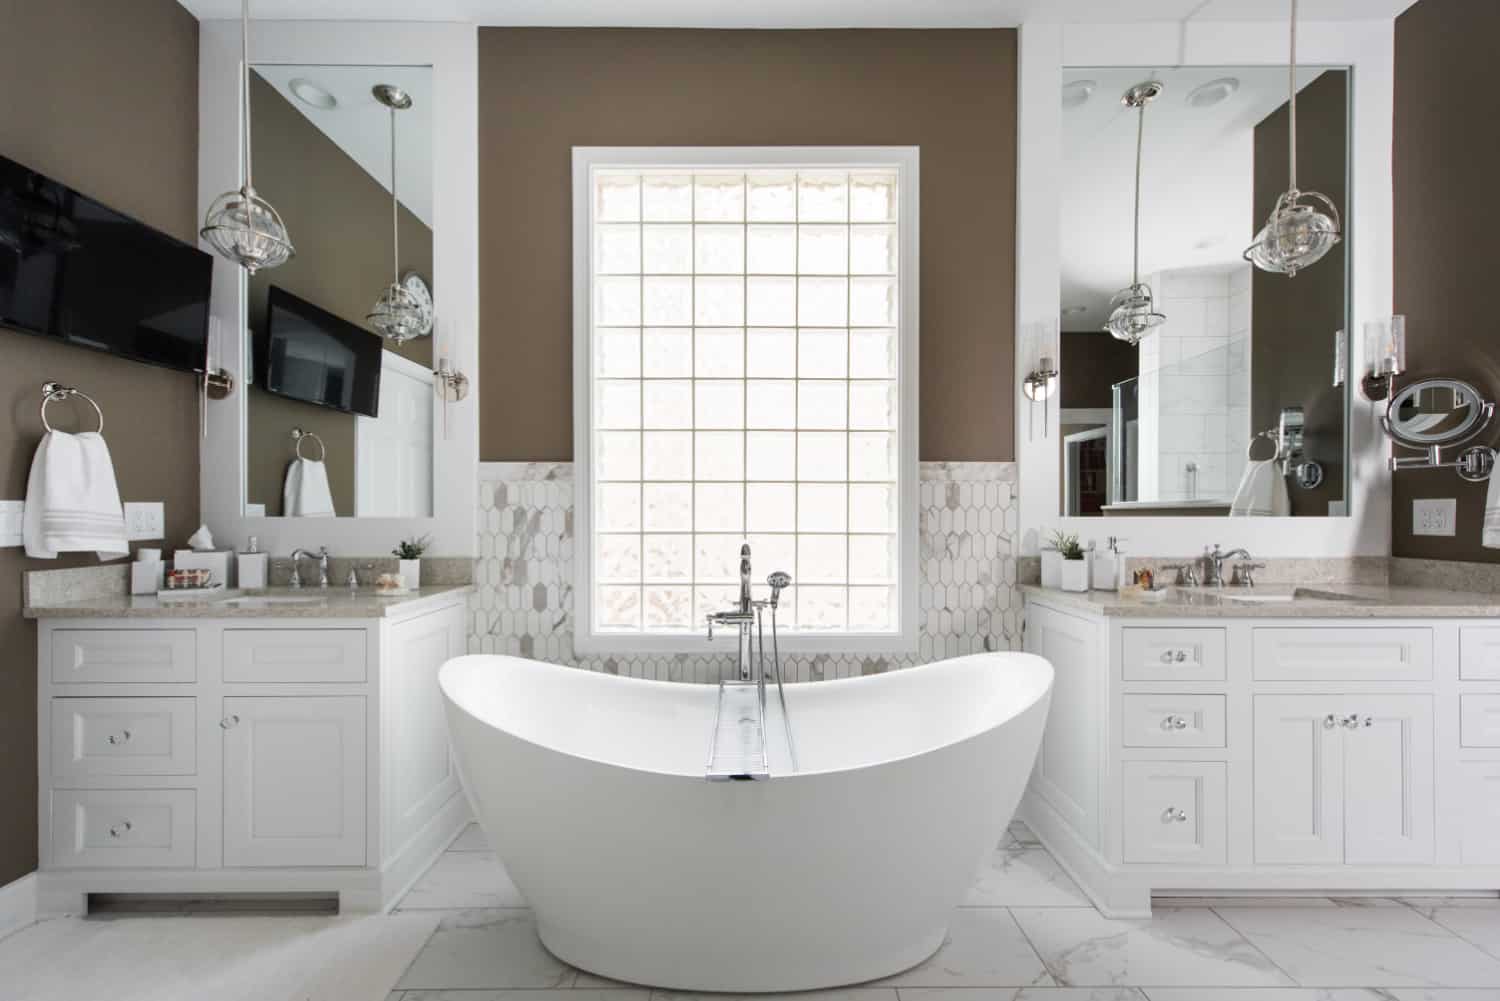 Nicholas Design Build | An oasis-like bathroom with a white tub and brown walls.